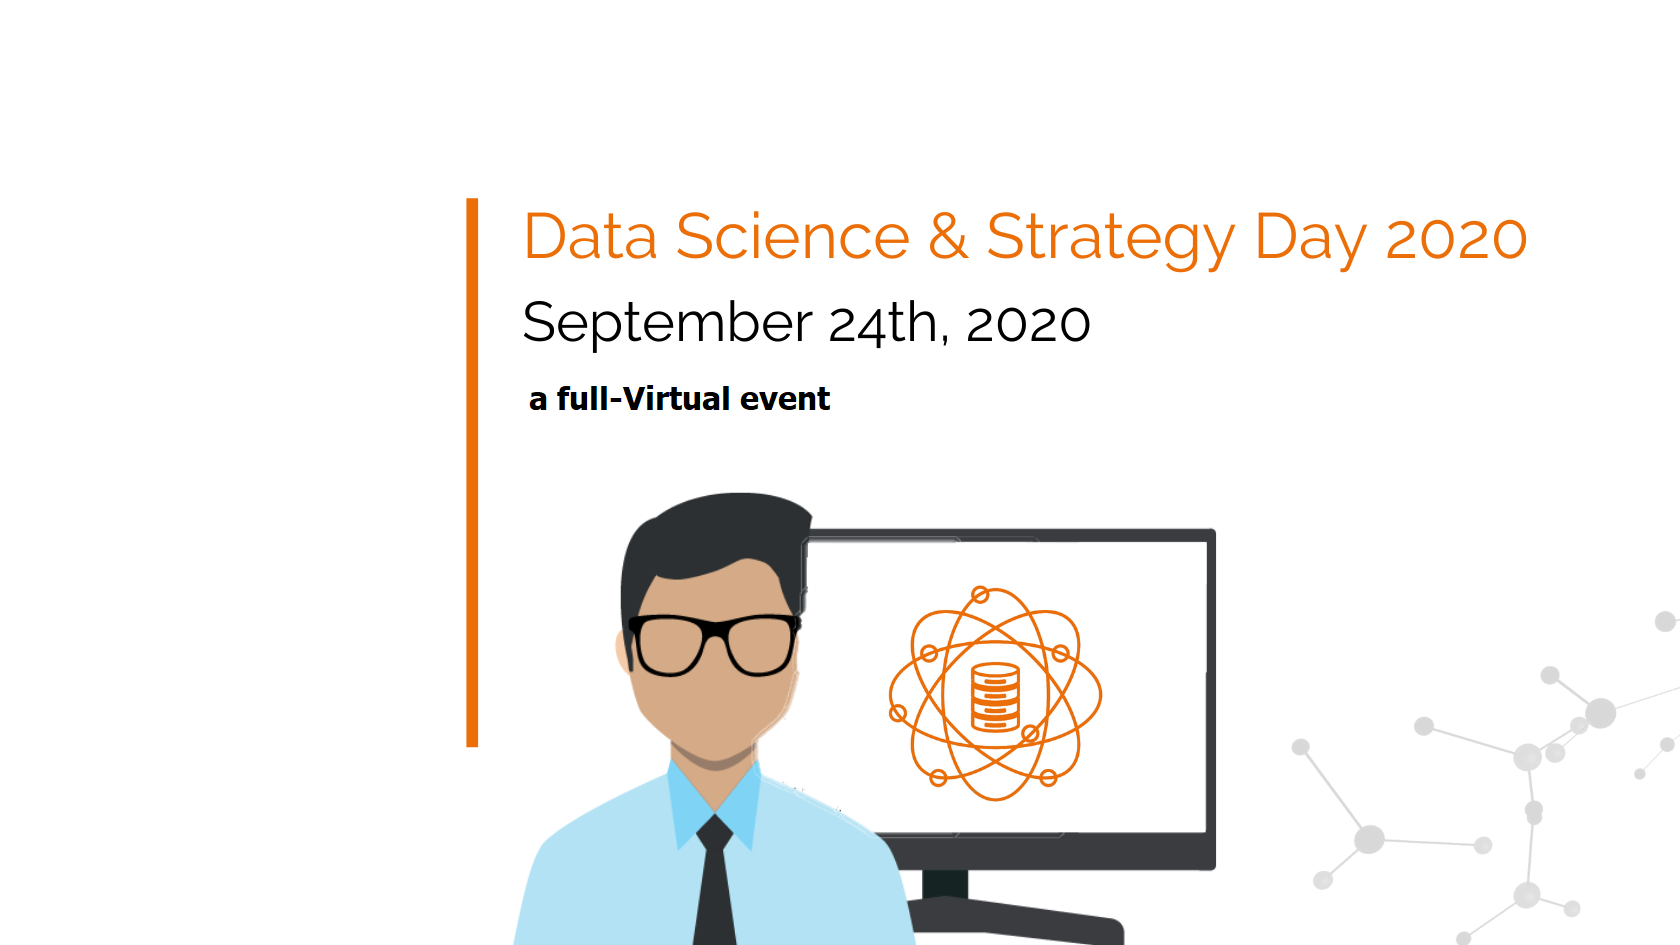 Data Science & Strategy Day 2020